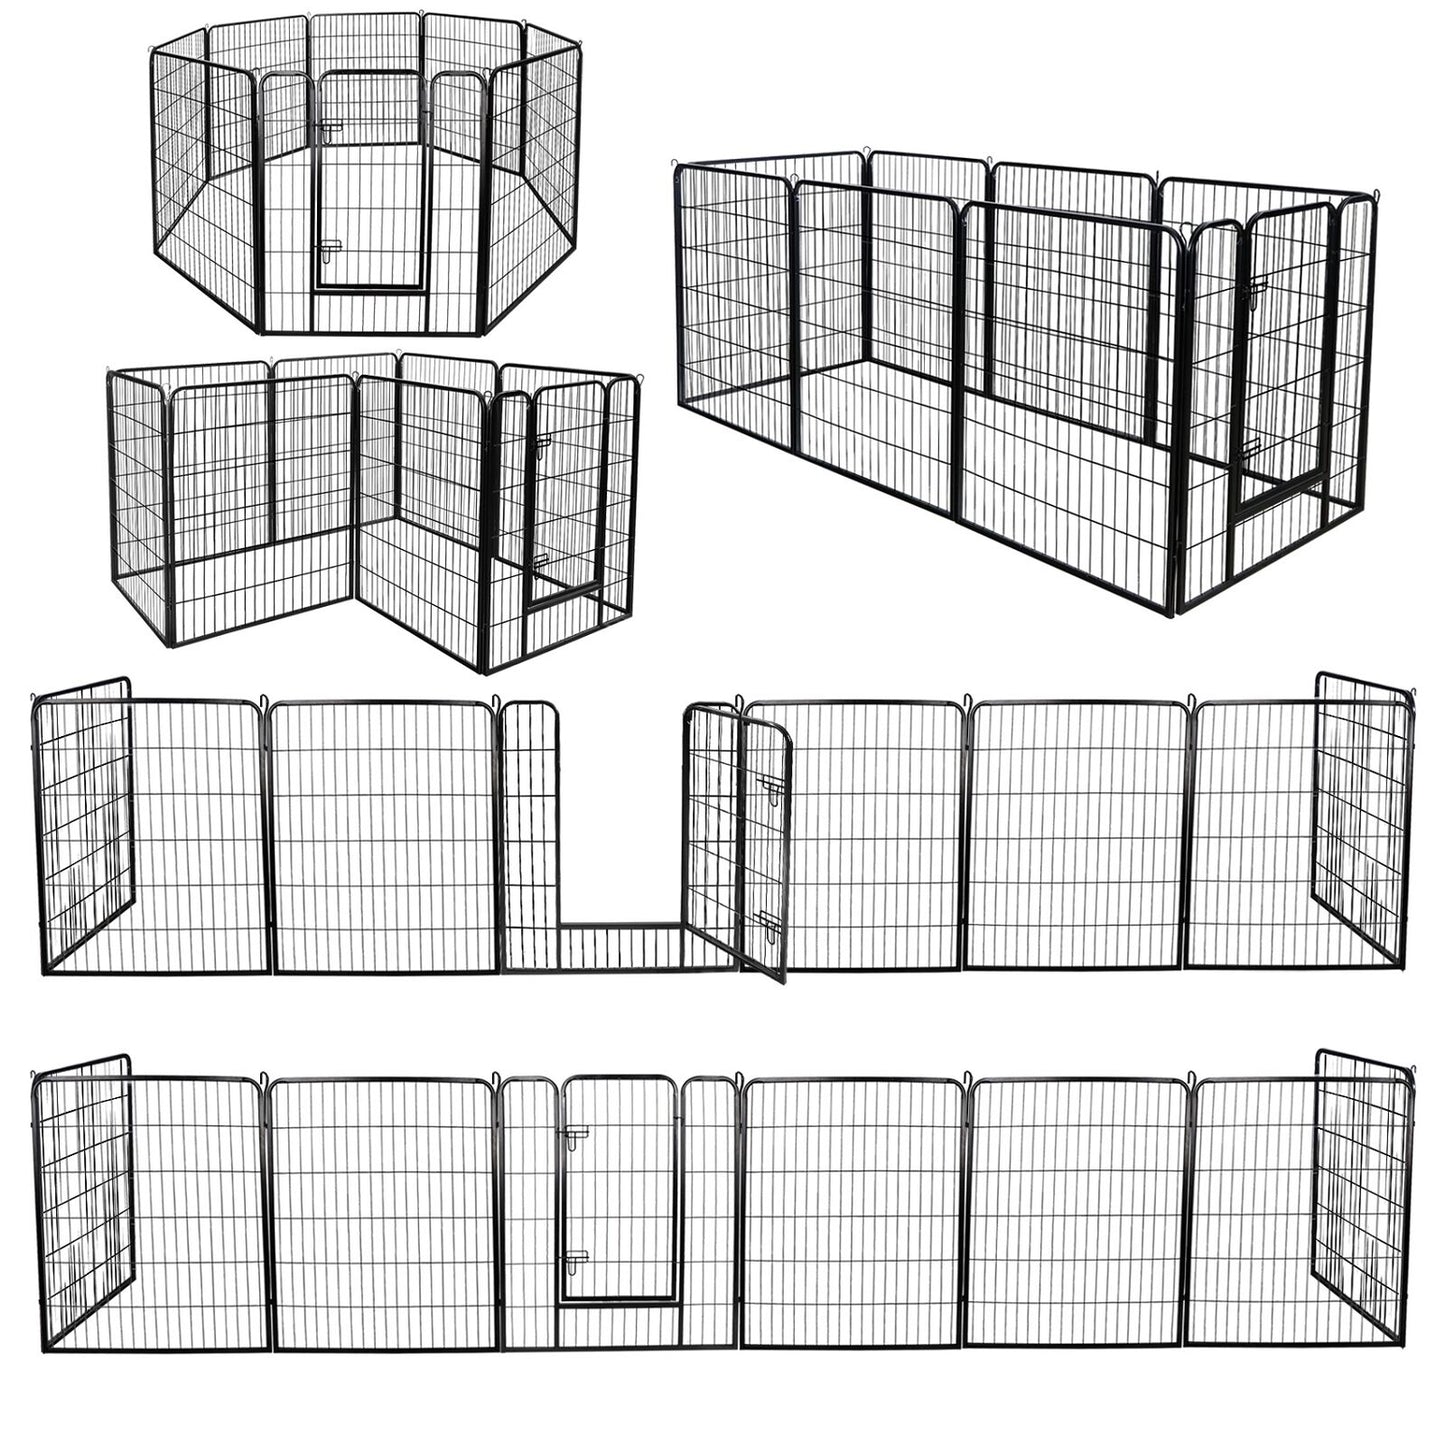 2X 39" Tall Foldable 8 Panels Metal Pet Dog Puppy Cat Exercise Fence Barrier